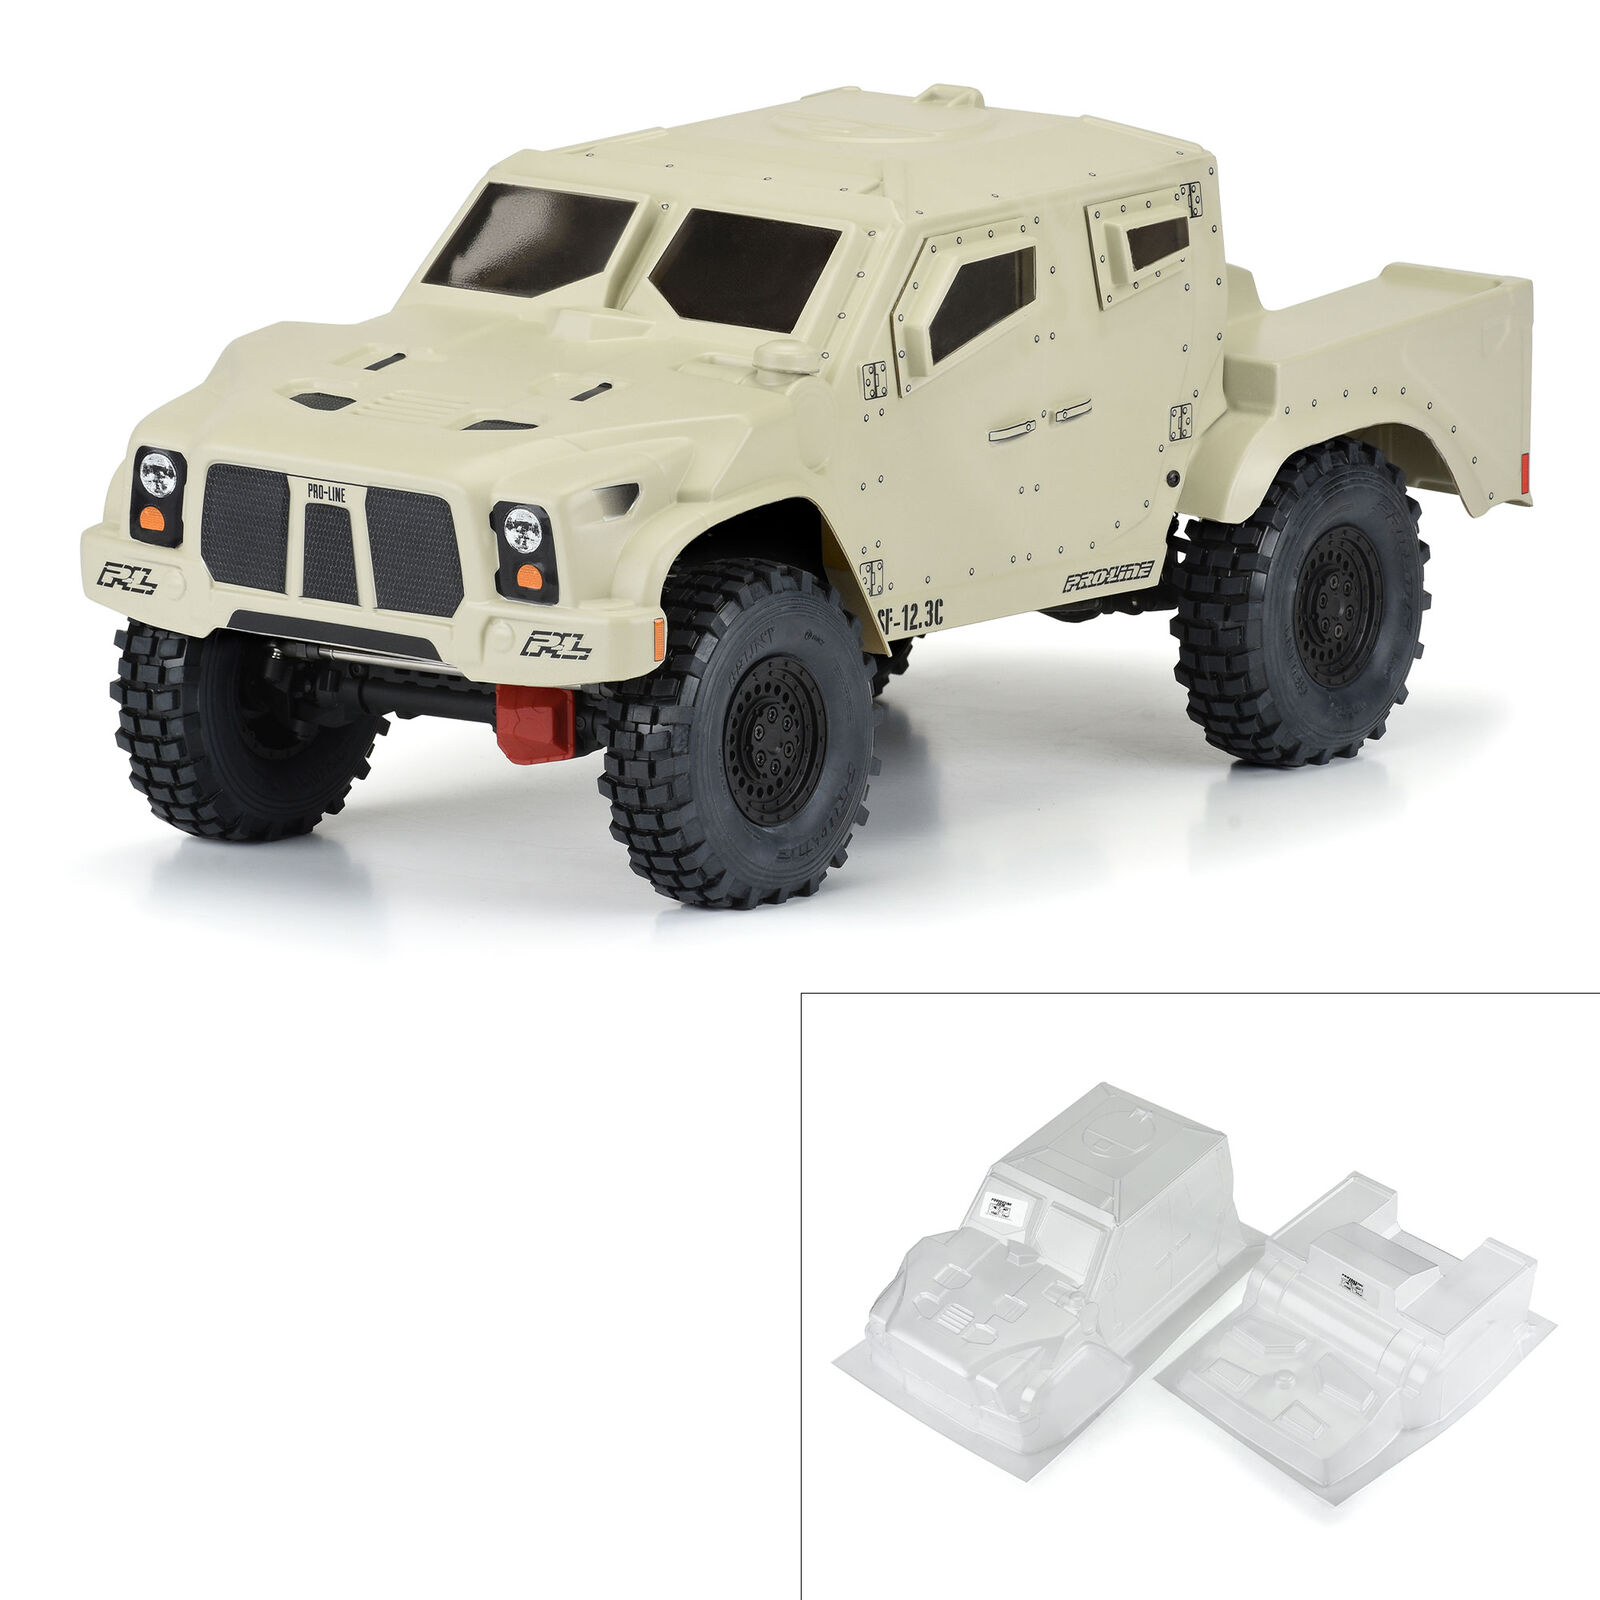 1/10 Comp Wagon Cab-Only Clear Body 12.3 (313mm) Wheelbase Crawlers